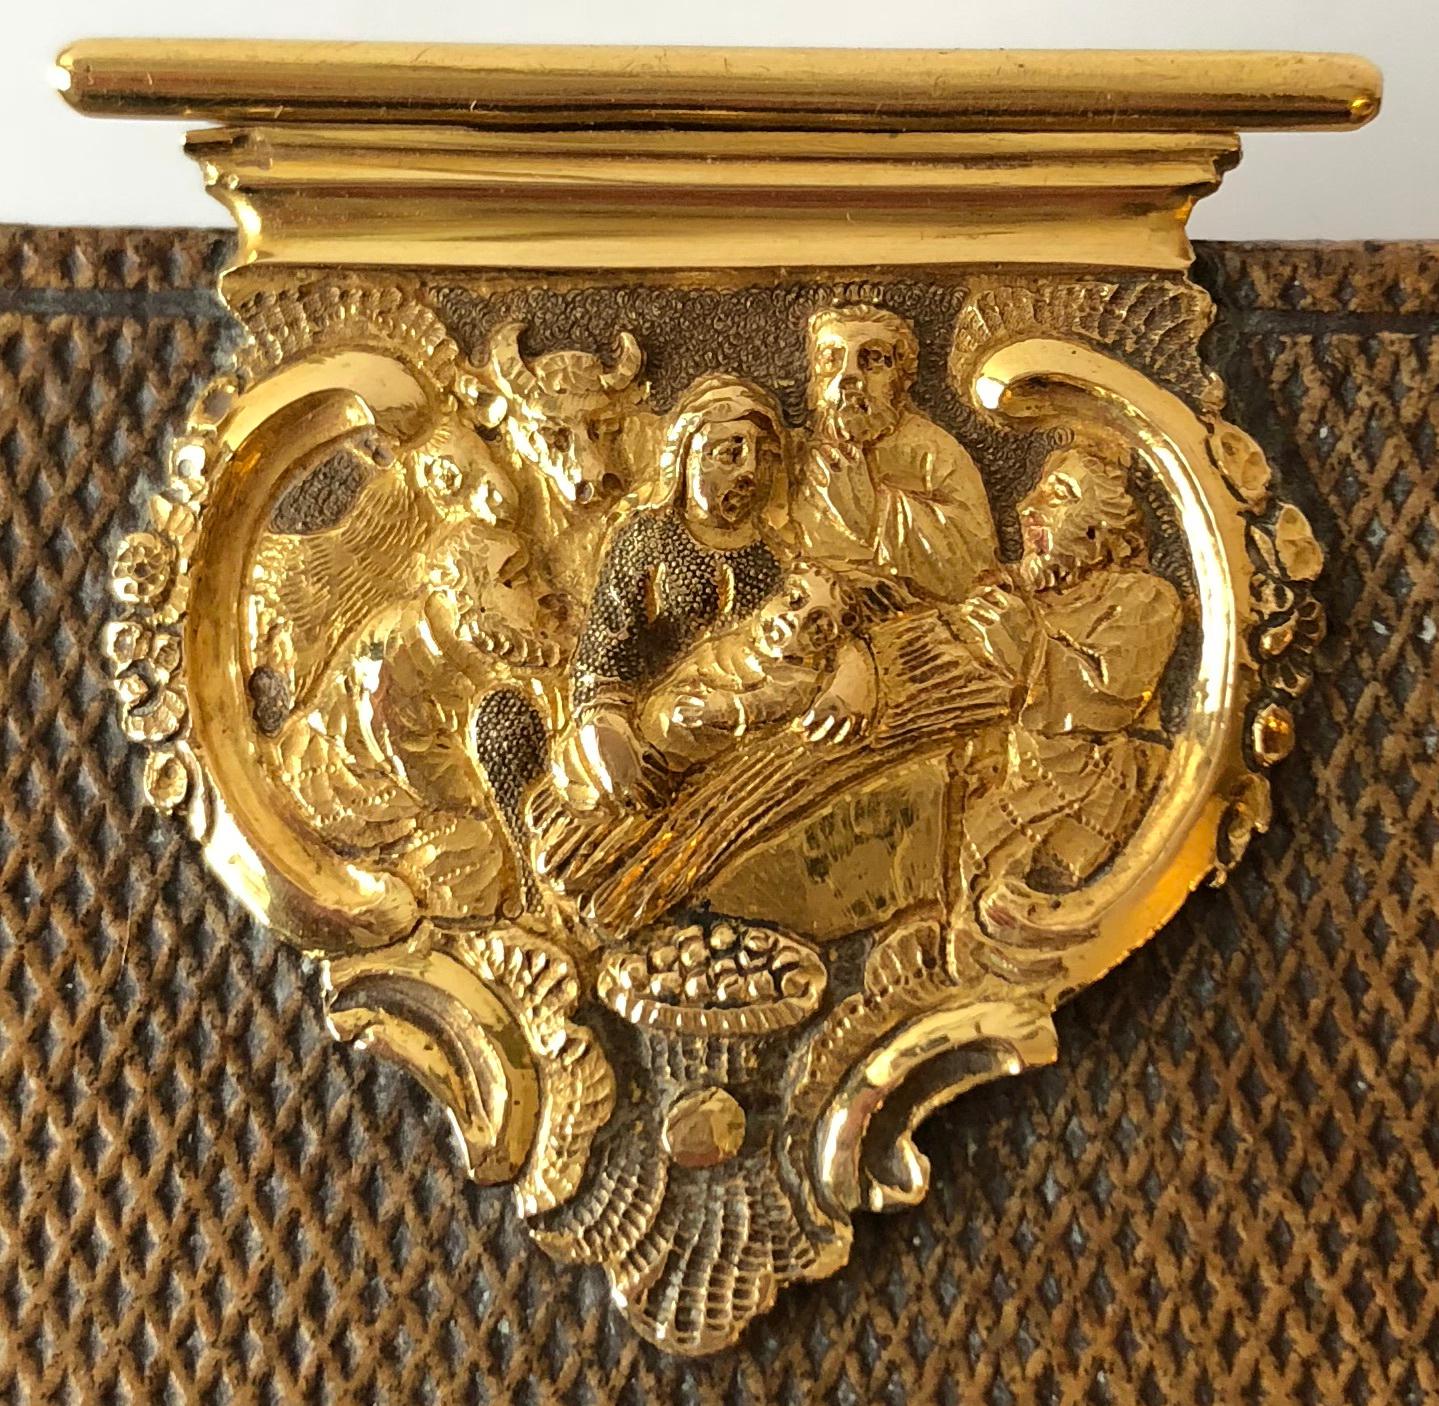 Dutch Bible with Gold Bookclasps 1